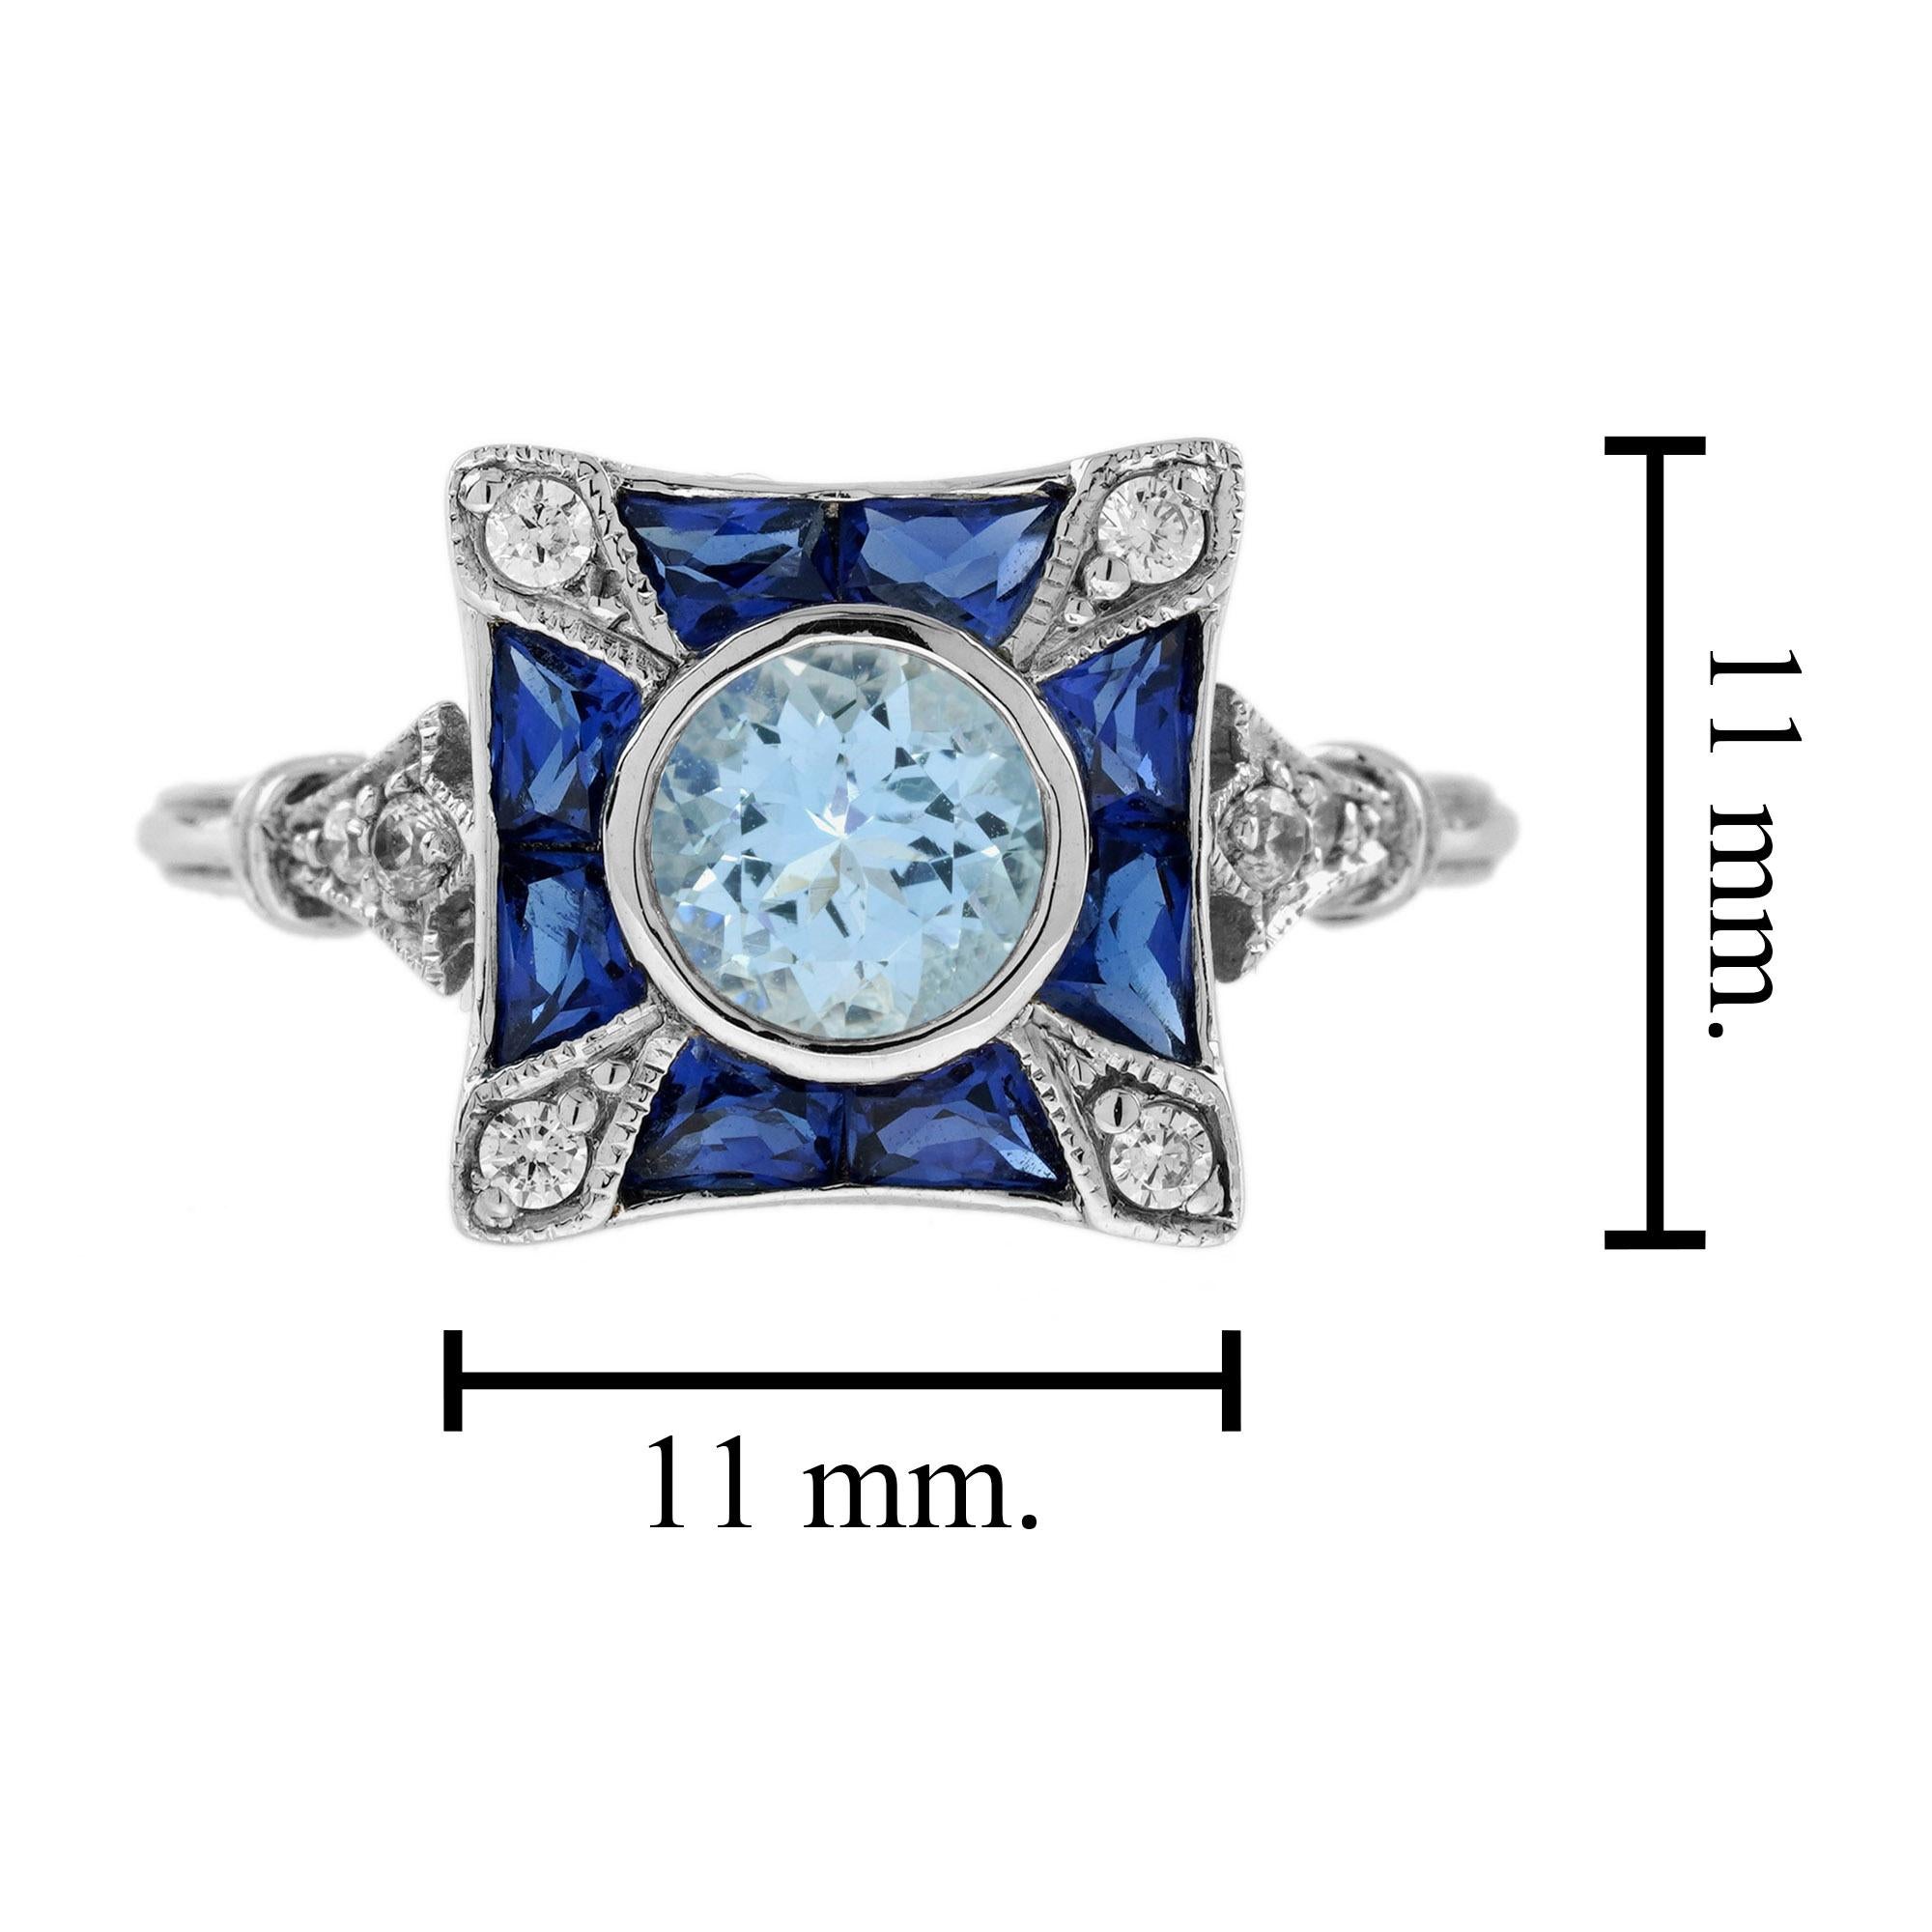 For Sale:  Aquamarine Diamond and Blue Sapphire Art Deco Style Engagement Ring in 18K Gold 7